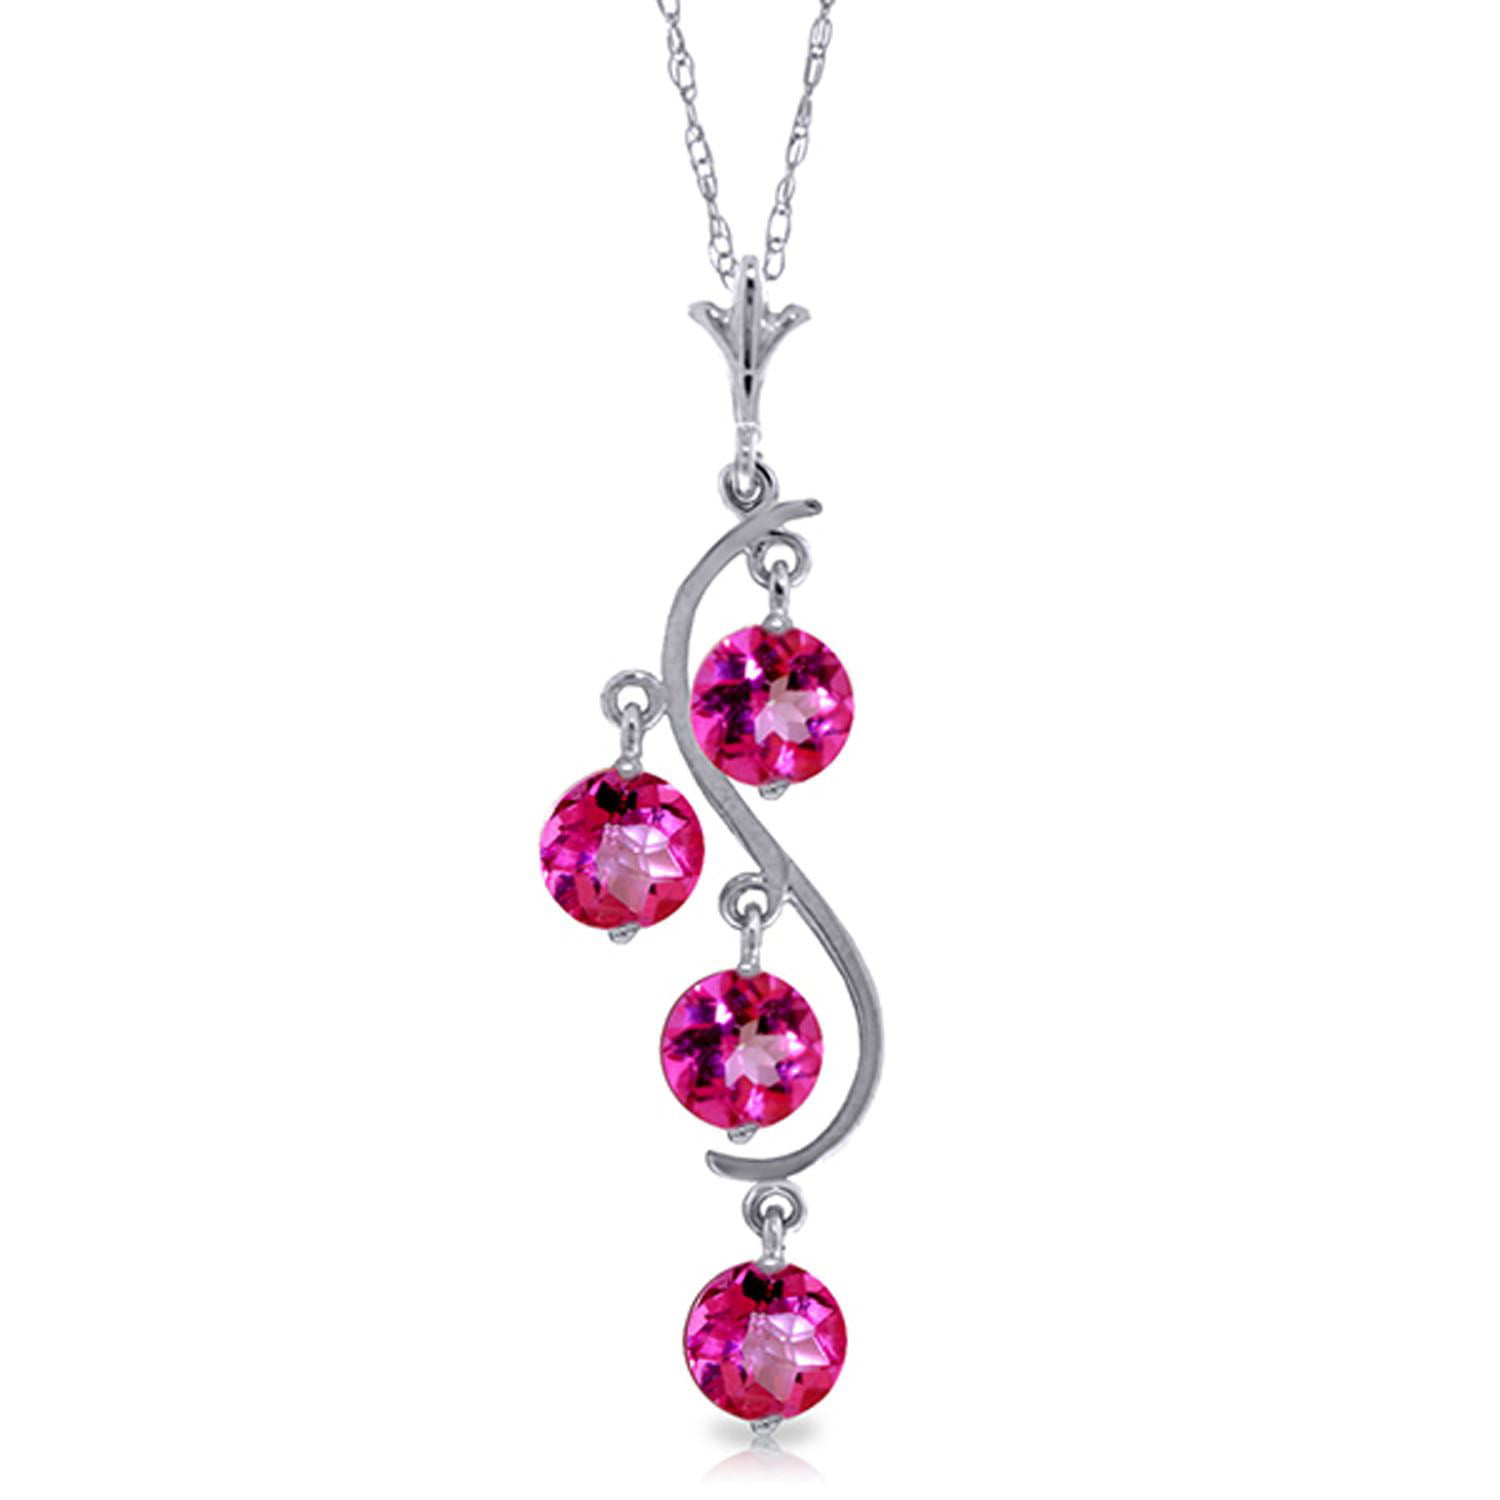 ALARRI 2.25 Carat 14K Solid White Gold Own Delight Pink Topaz Necklace with 20 Inch Chain Length